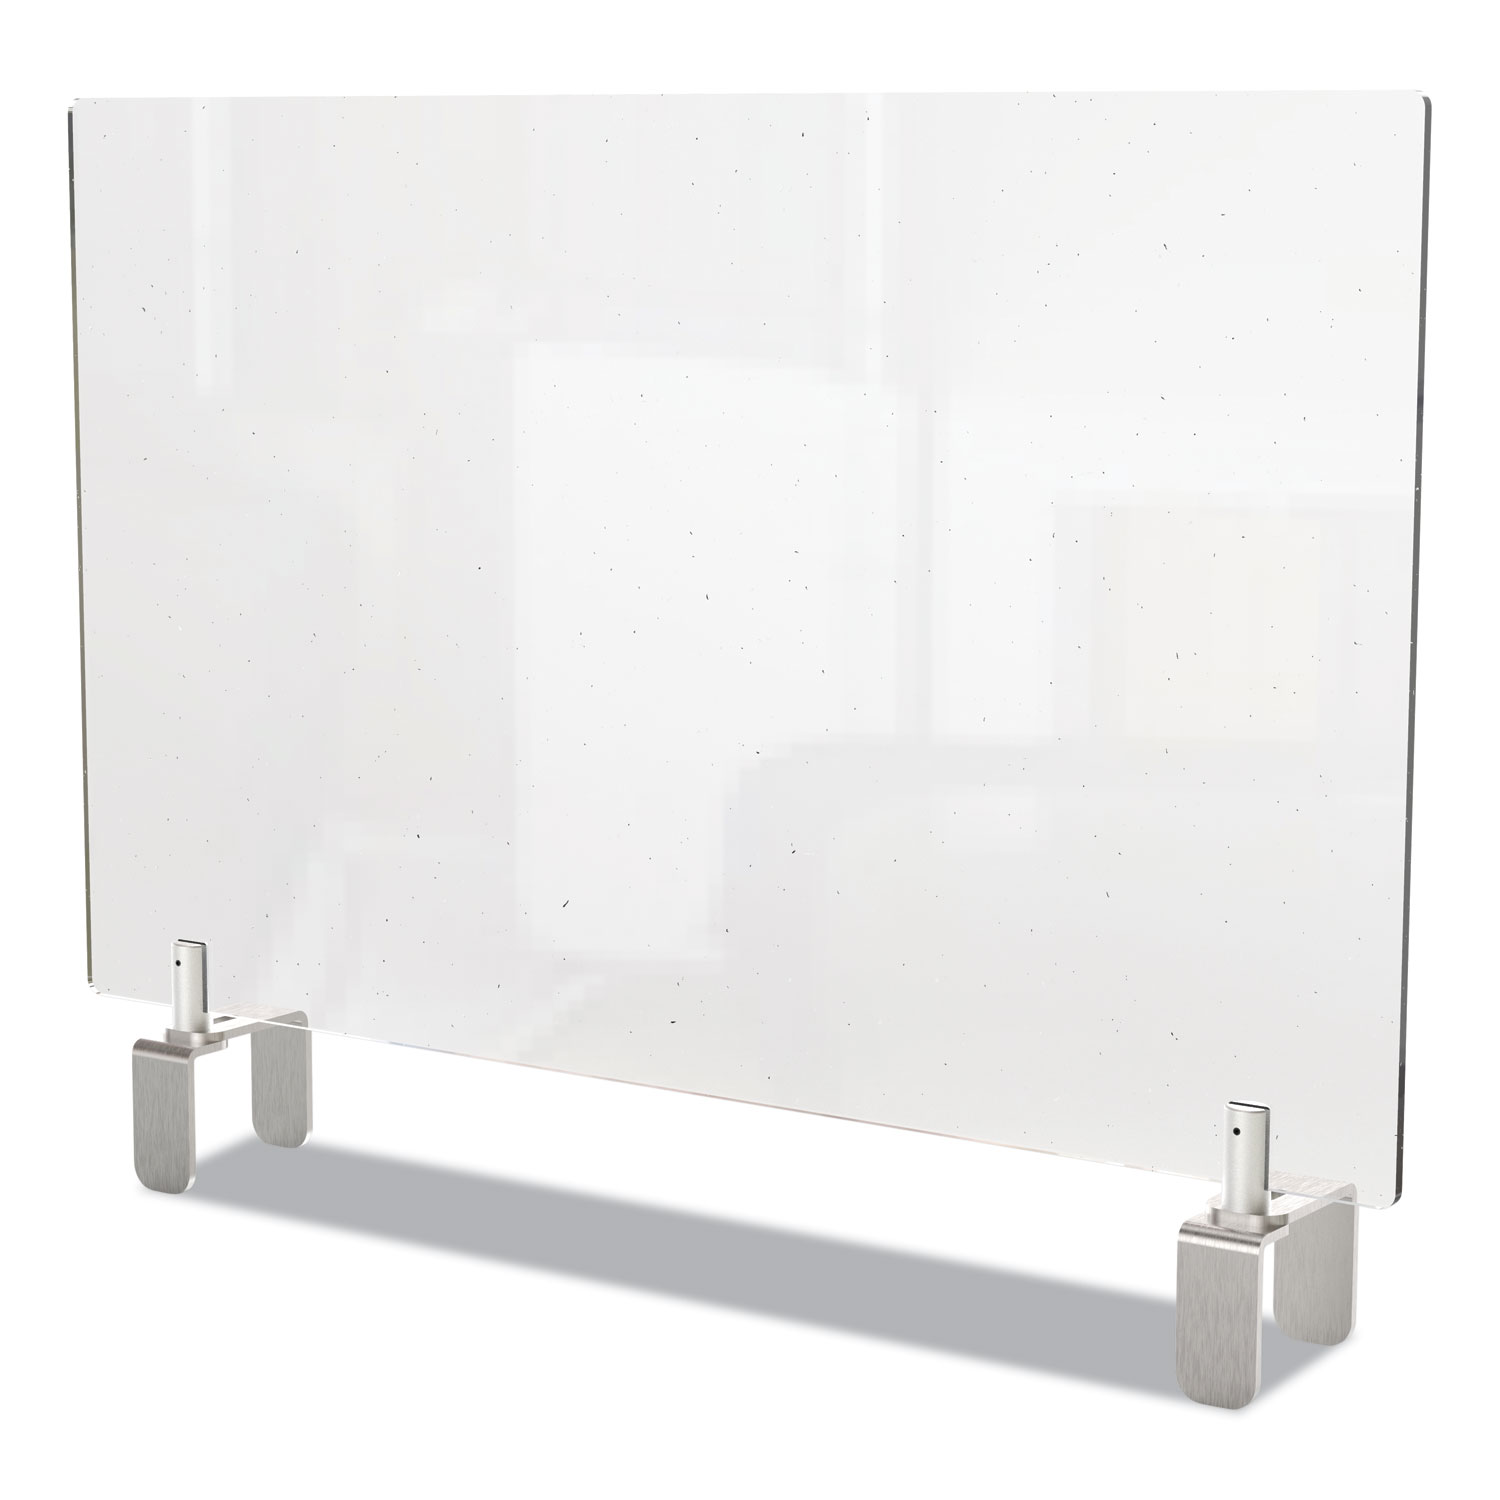  Ghent PEC2442-A Clear Partition Extender with Attached Clamp, 42 x 3.88 x 24, Thermoplastic Sheeting (GHEPEC2442A) 